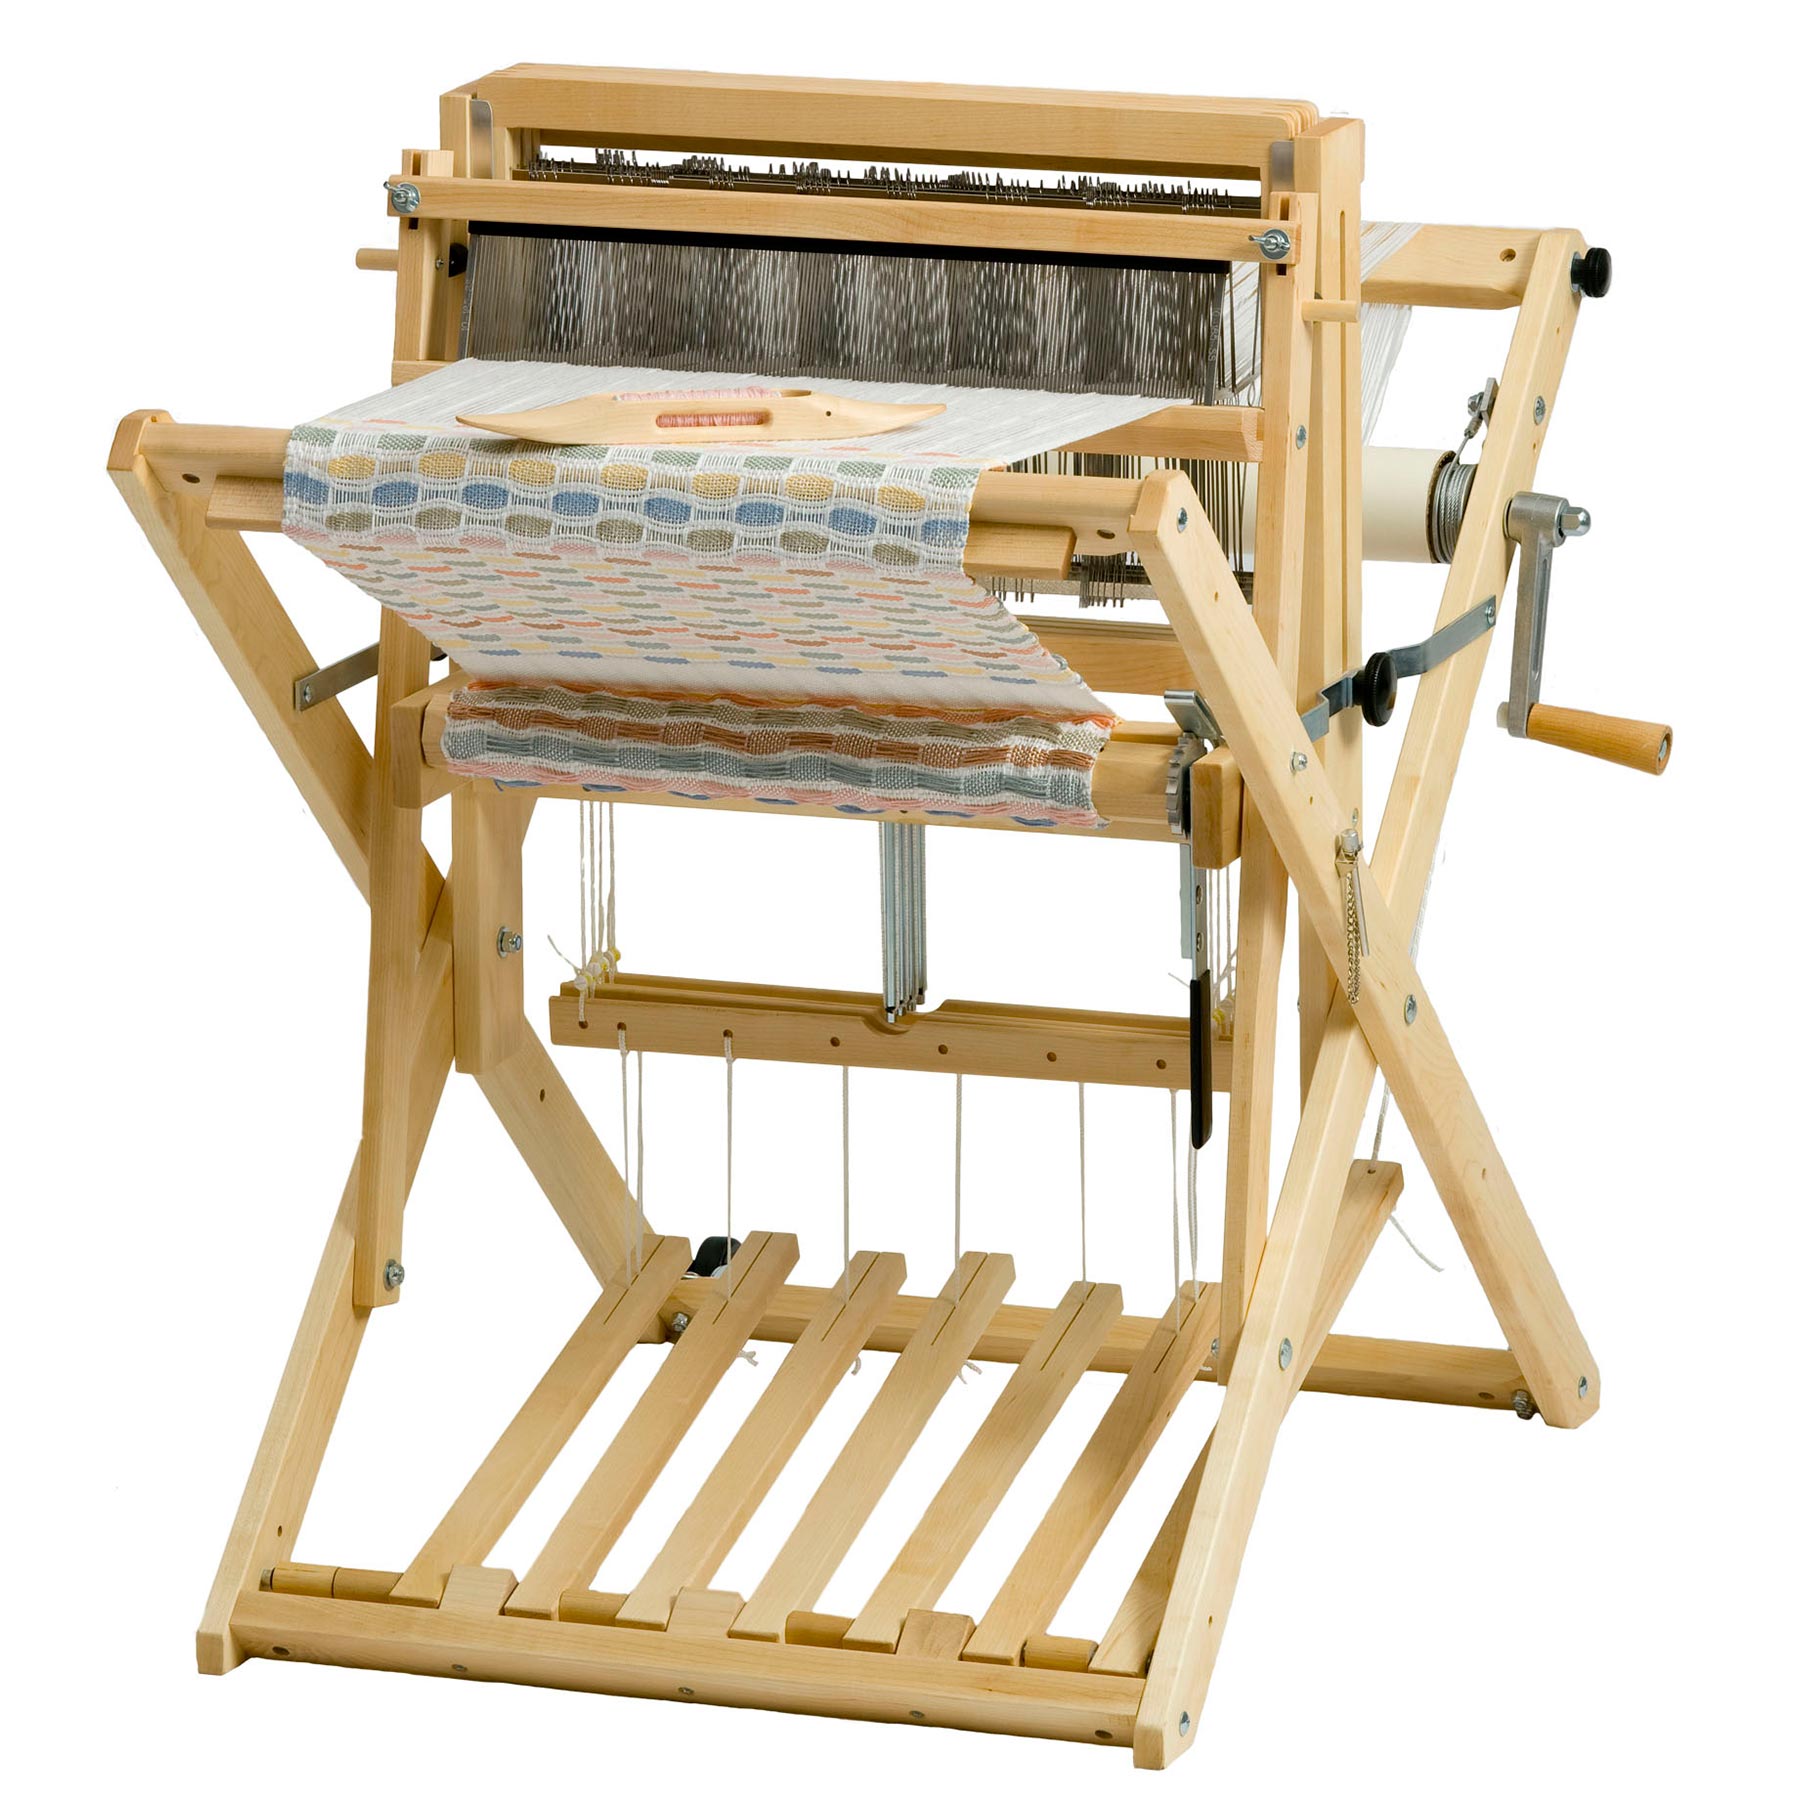 Image of the front view of a Schacht Wolf Pup Loom with 6 treadles.